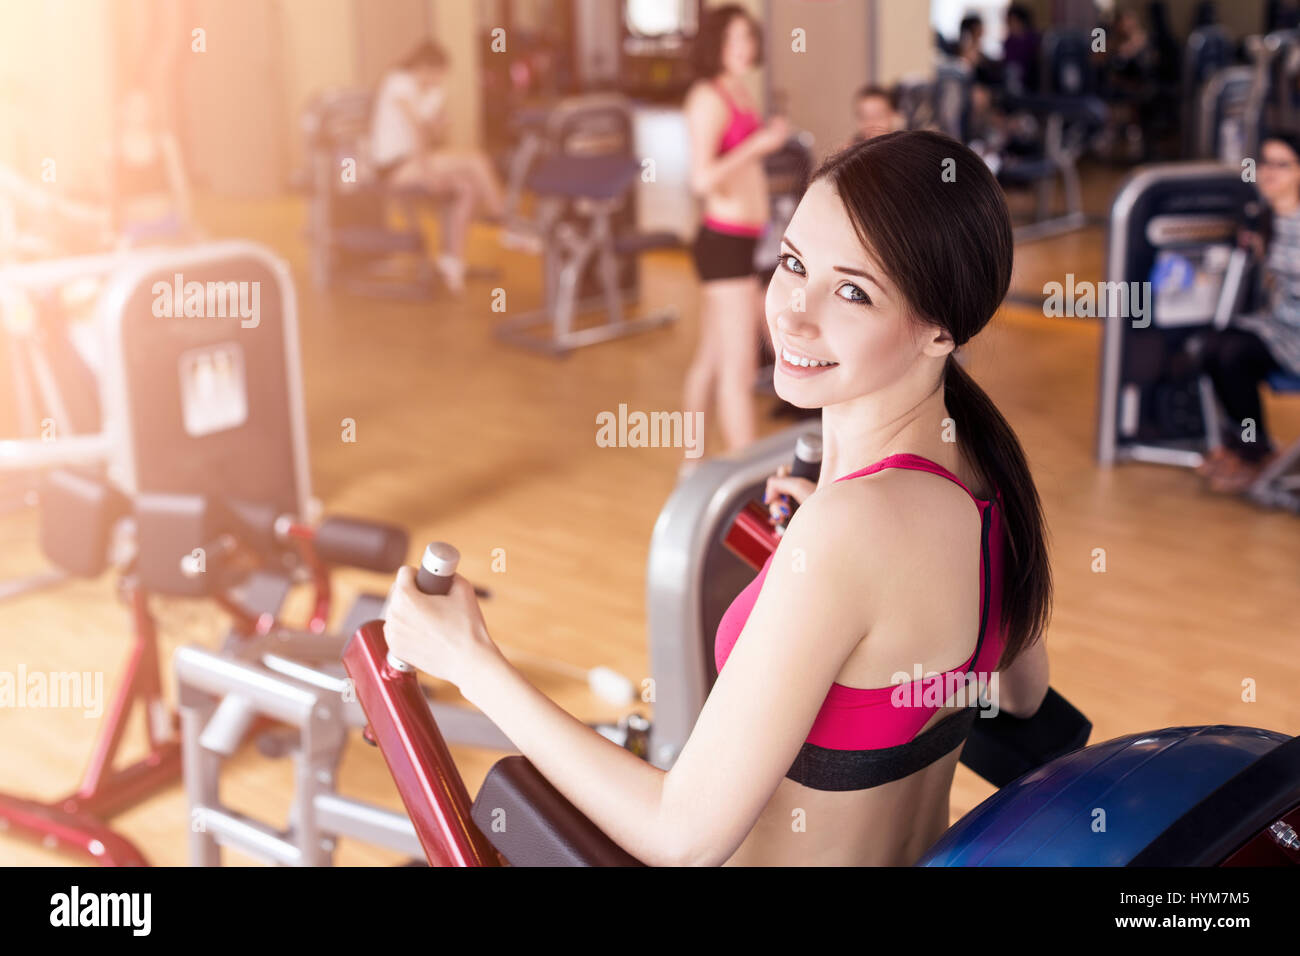 Young woman doing exercises in gym Stock Photo